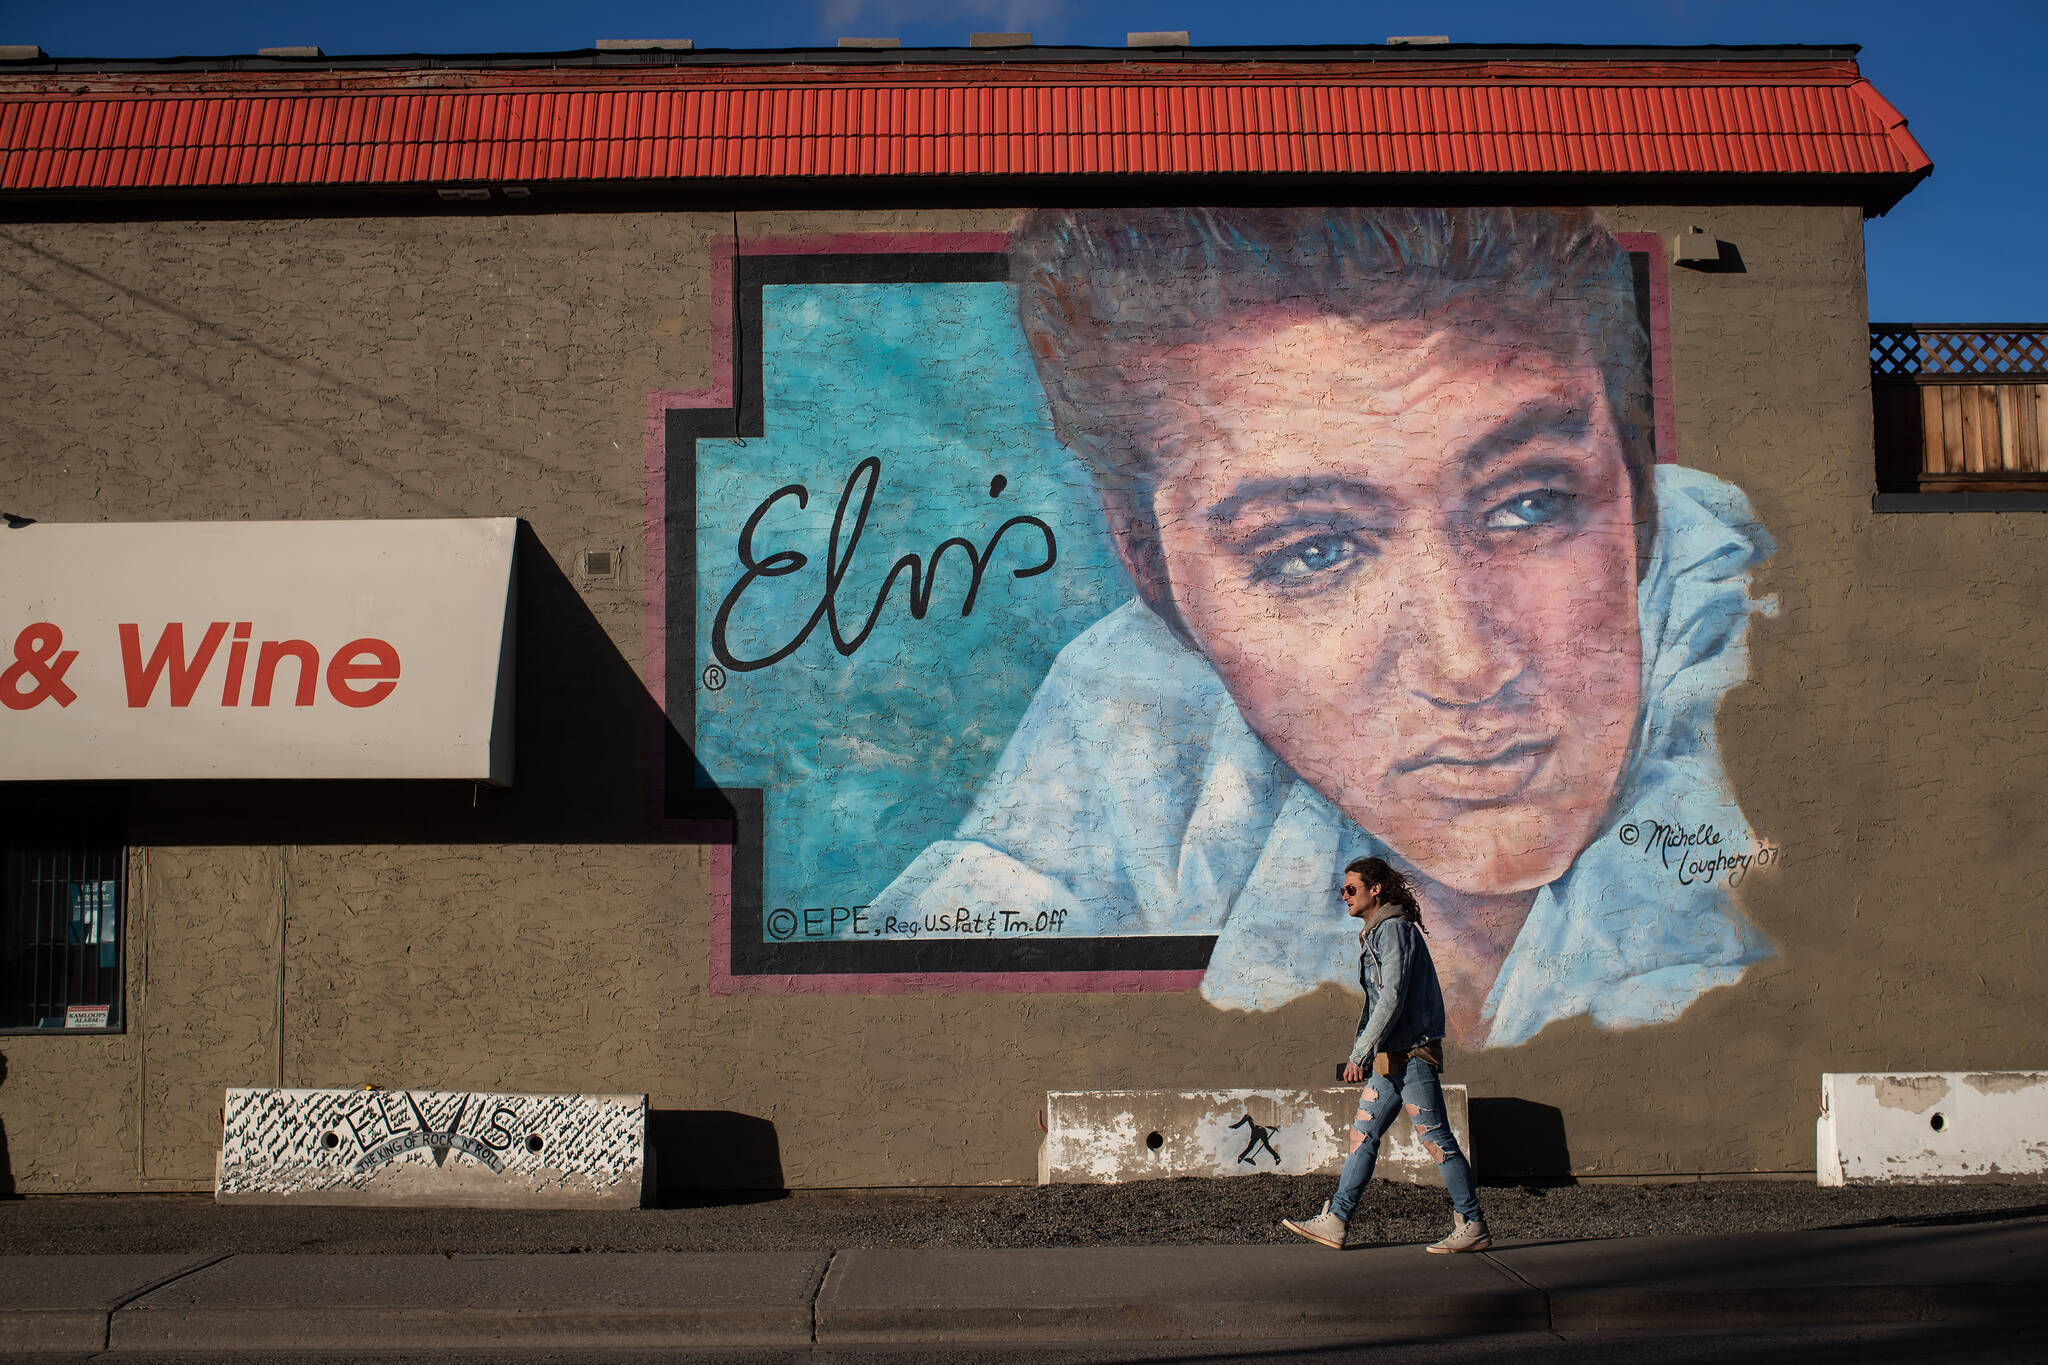 A man walks past a mural of Elvis Presley on the outside of a liquor store, in Merritt, B.C., on Wednesday, March 23, 2022. THE CANADIAN PRESS/Darryl Dyck